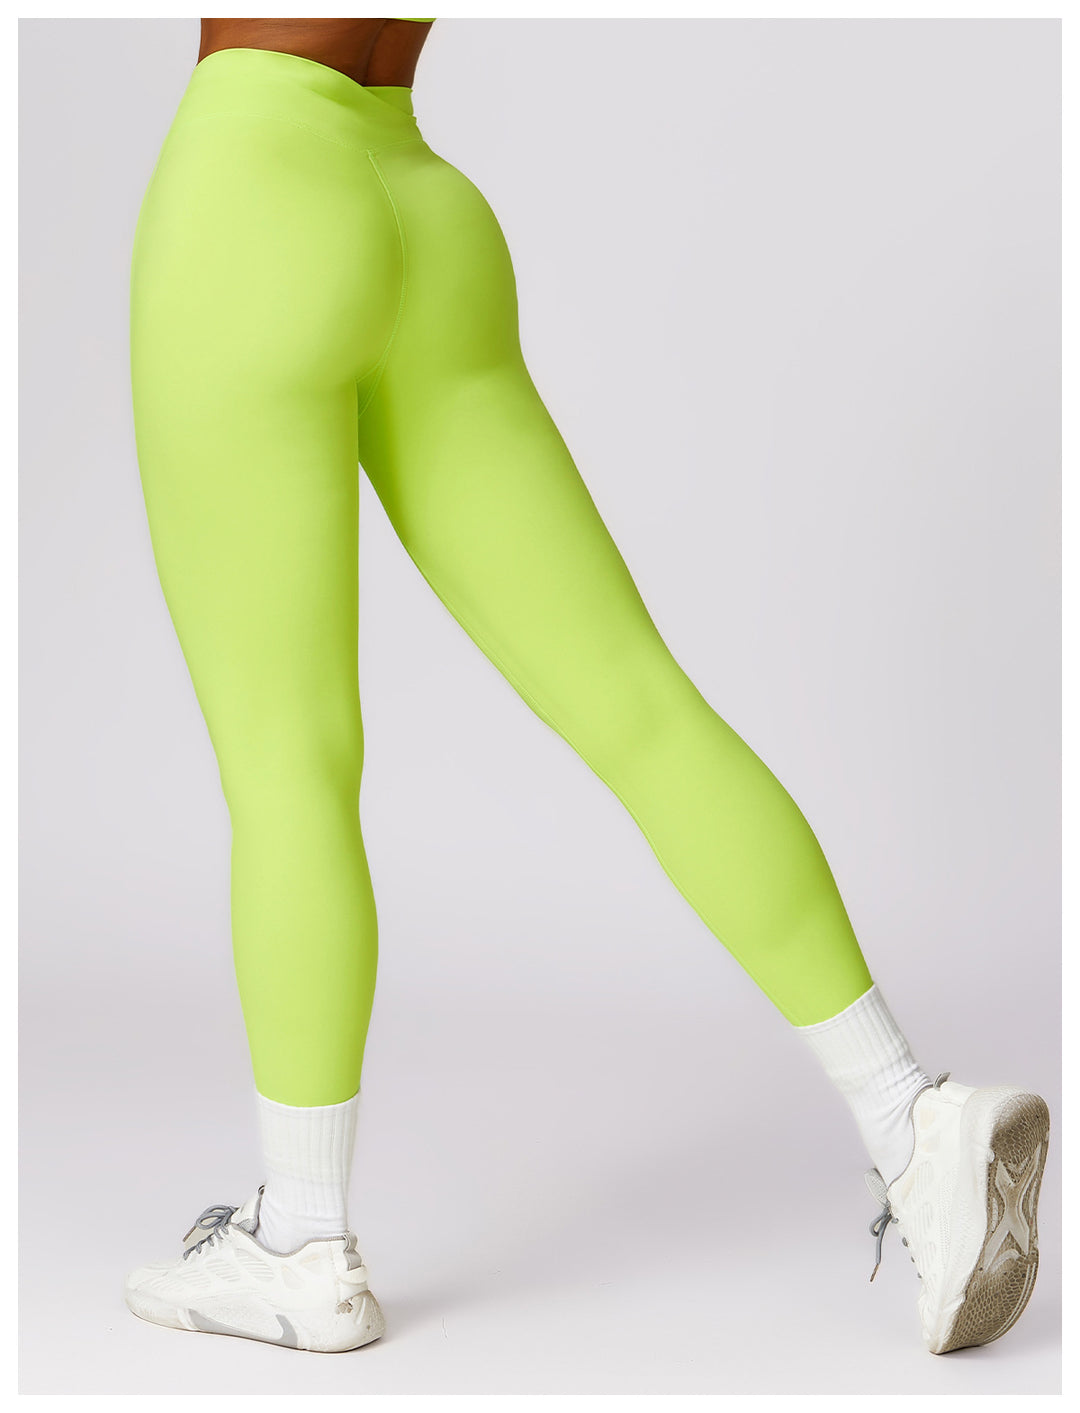 Wrap and Run Fitted Leggings